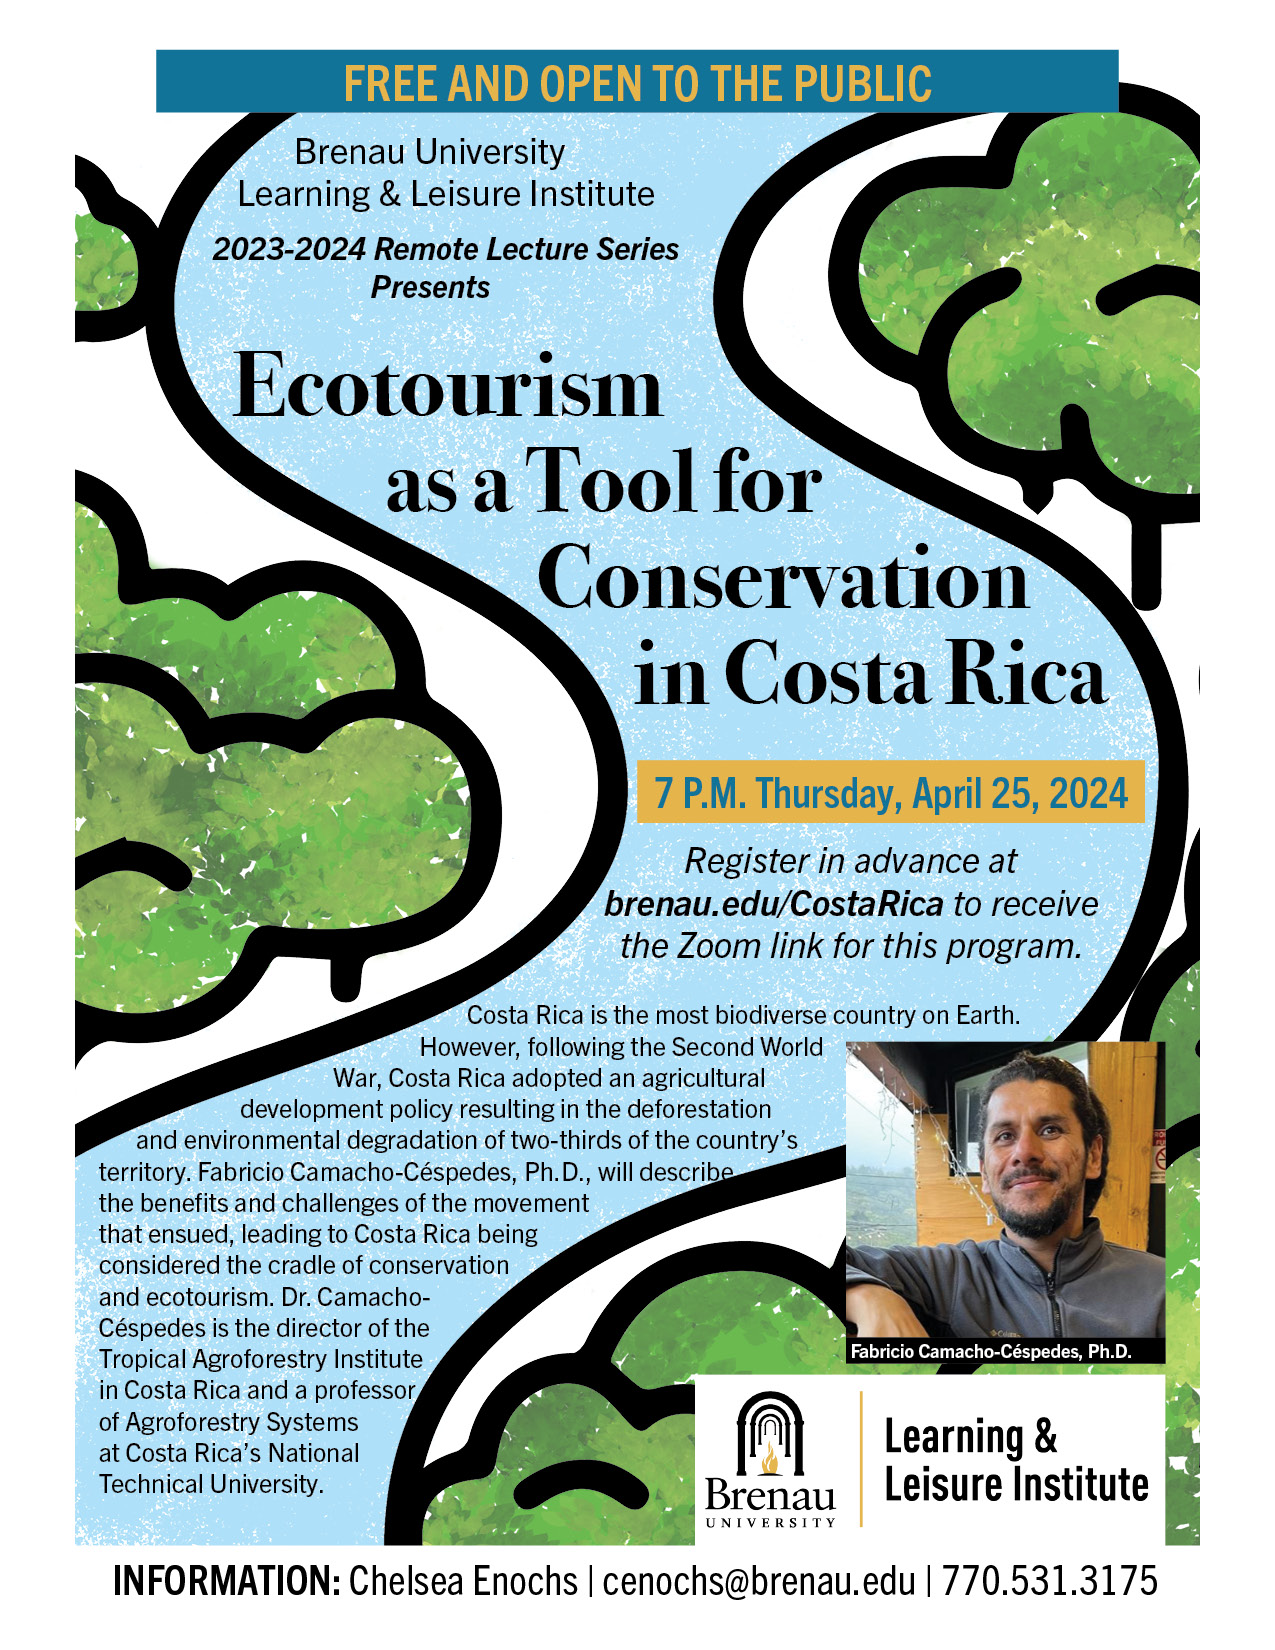 BULLI Leacture Series Ecotourism as a Tool for Conservation in Costa Rica